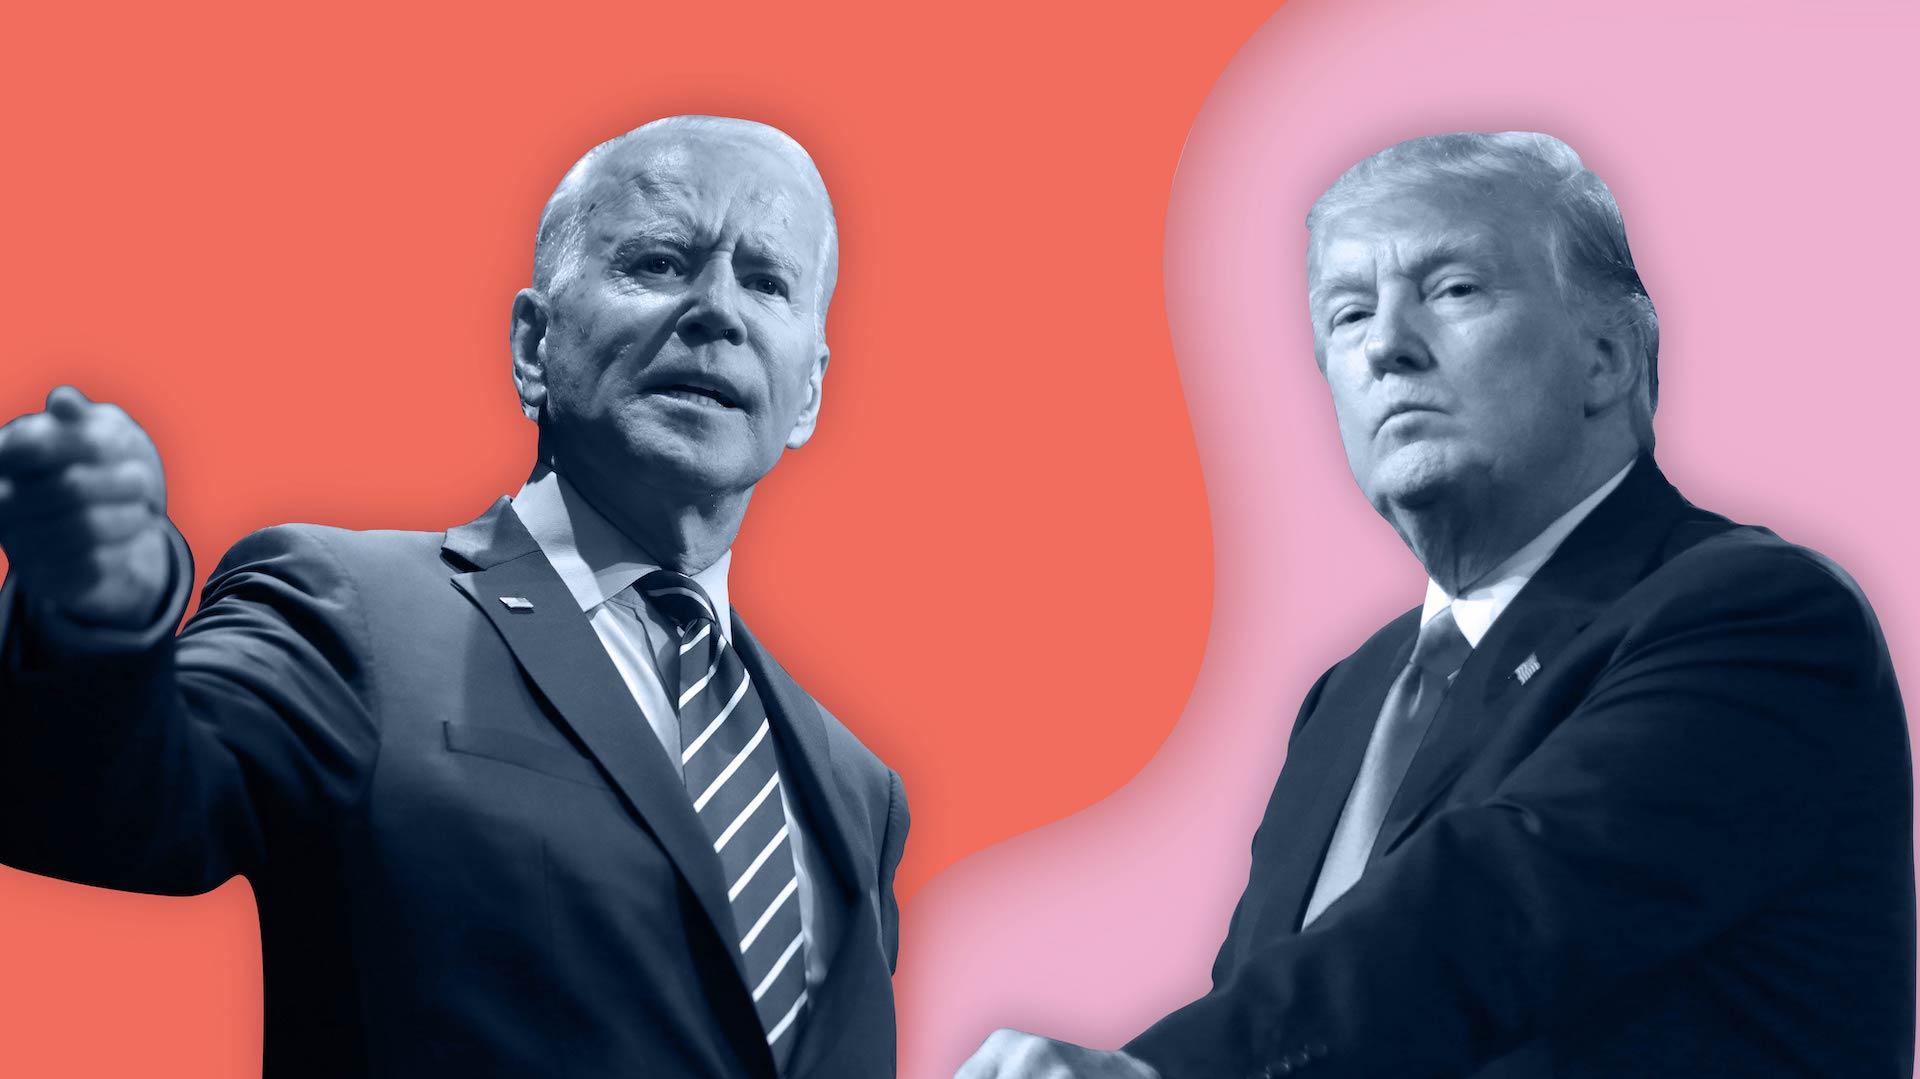 Biden Vs Trump Where The Candidates Stand On Climate Issues